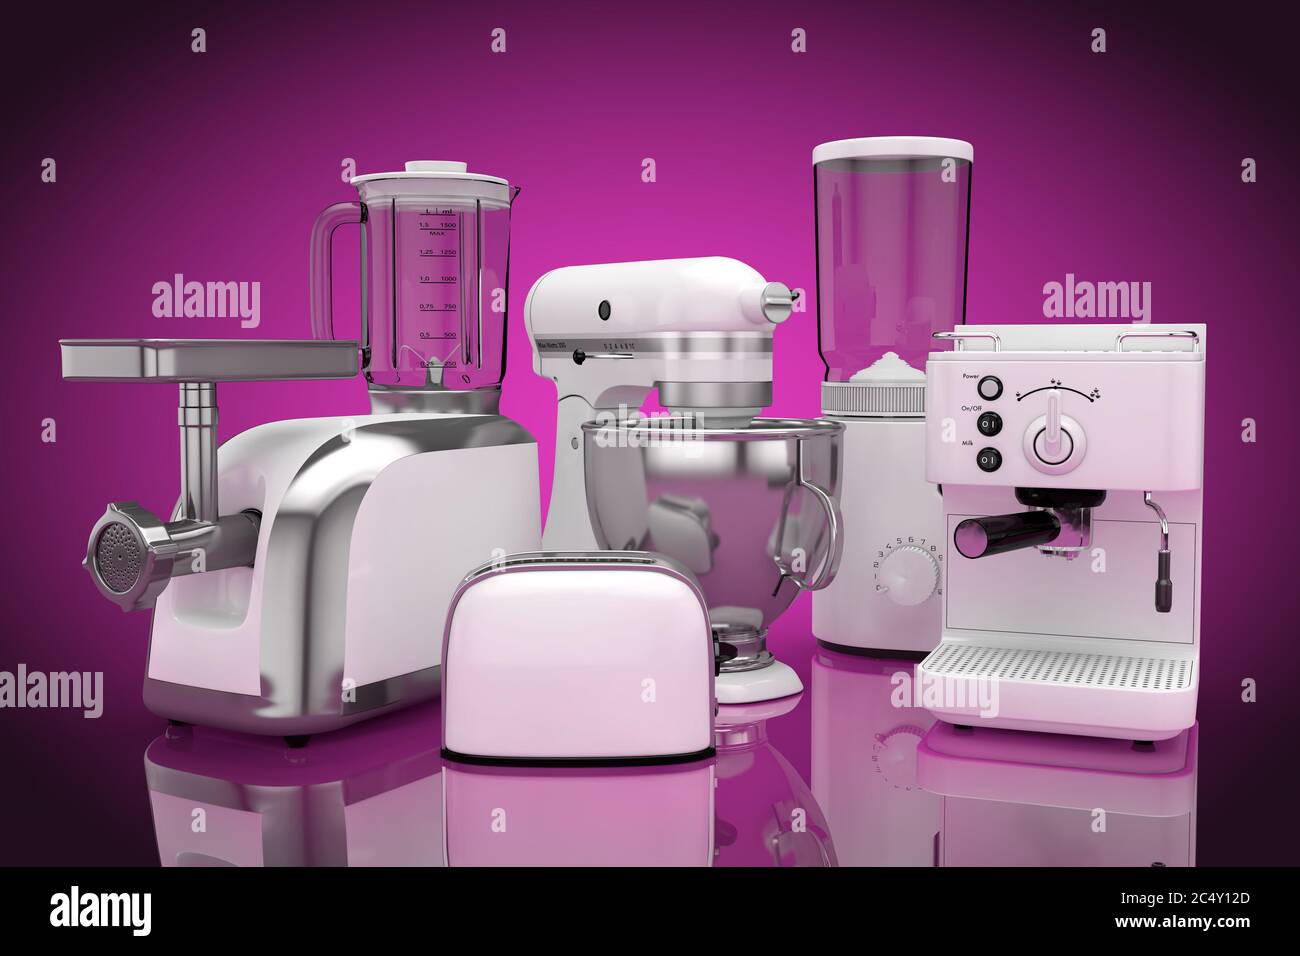 https://c8.alamy.com/comp/2C4Y12D/kitchen-appliances-set-white-blender-toaster-coffee-machine-meat-ginder-food-mixer-and-coffee-grinder-on-a-pink-background-3d-rendering-2C4Y12D.jpg